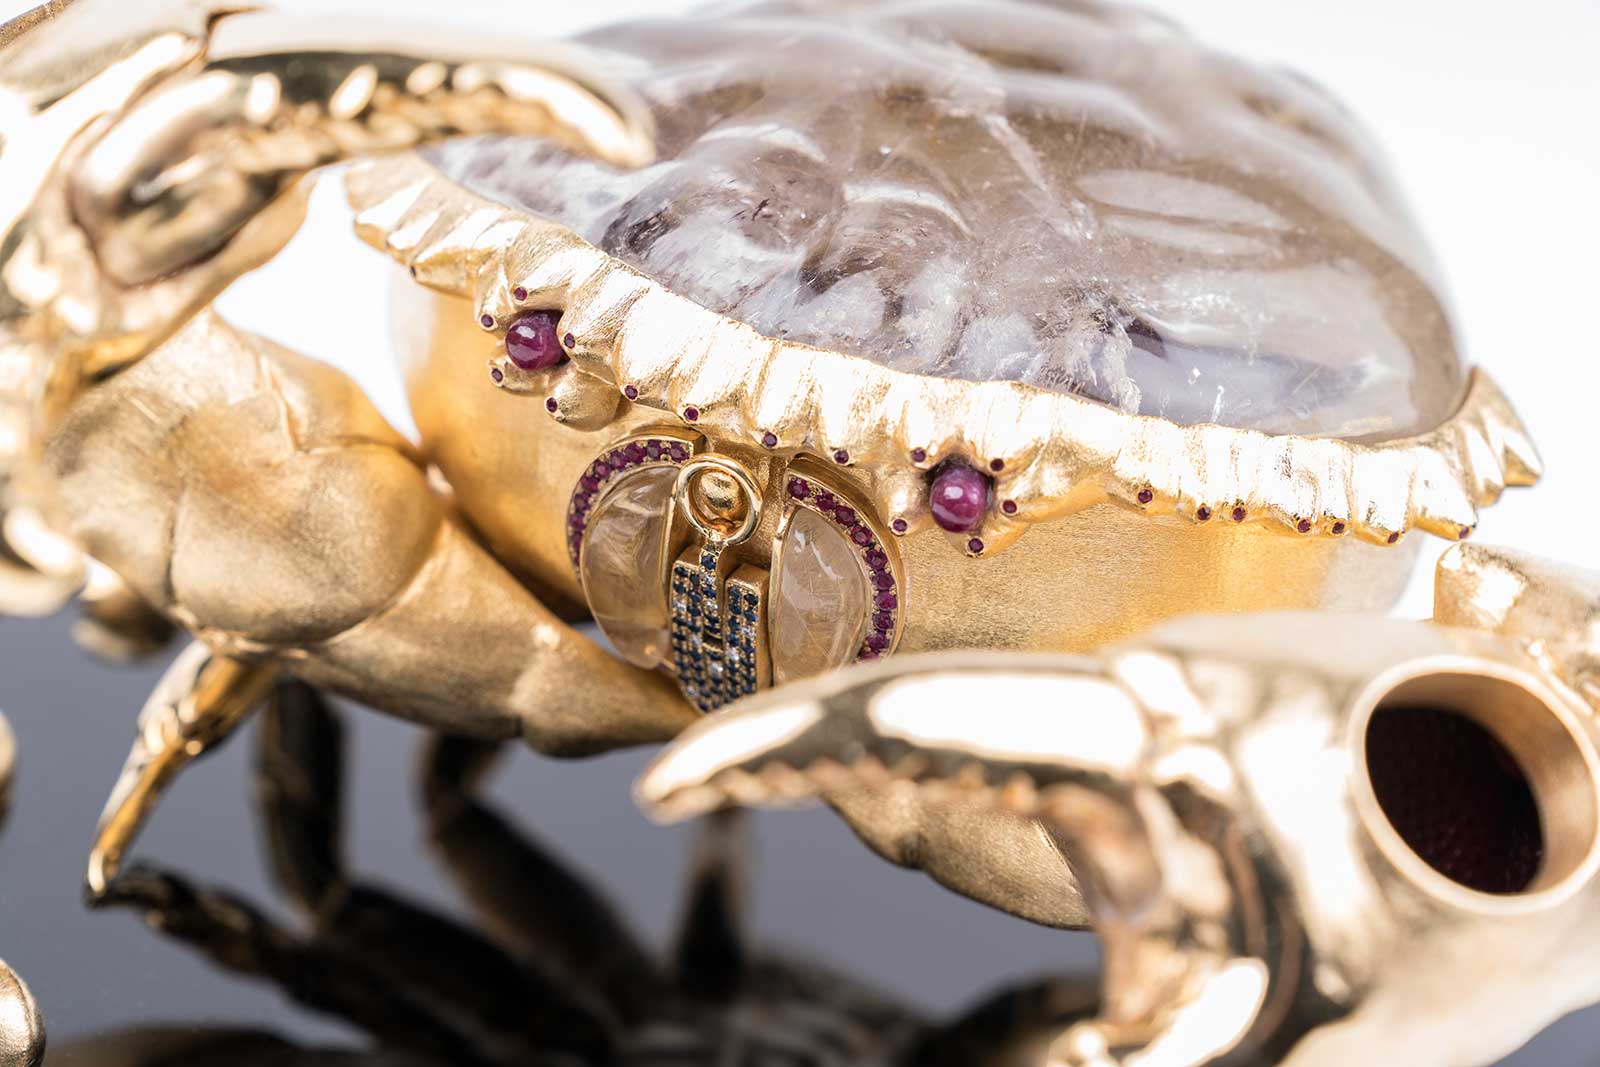 L’Aquart ‘The Crab Prince’ in hand carved Brazilian golden rutilated quartz, gold, diamonds, rubies, sapphires and obsidian